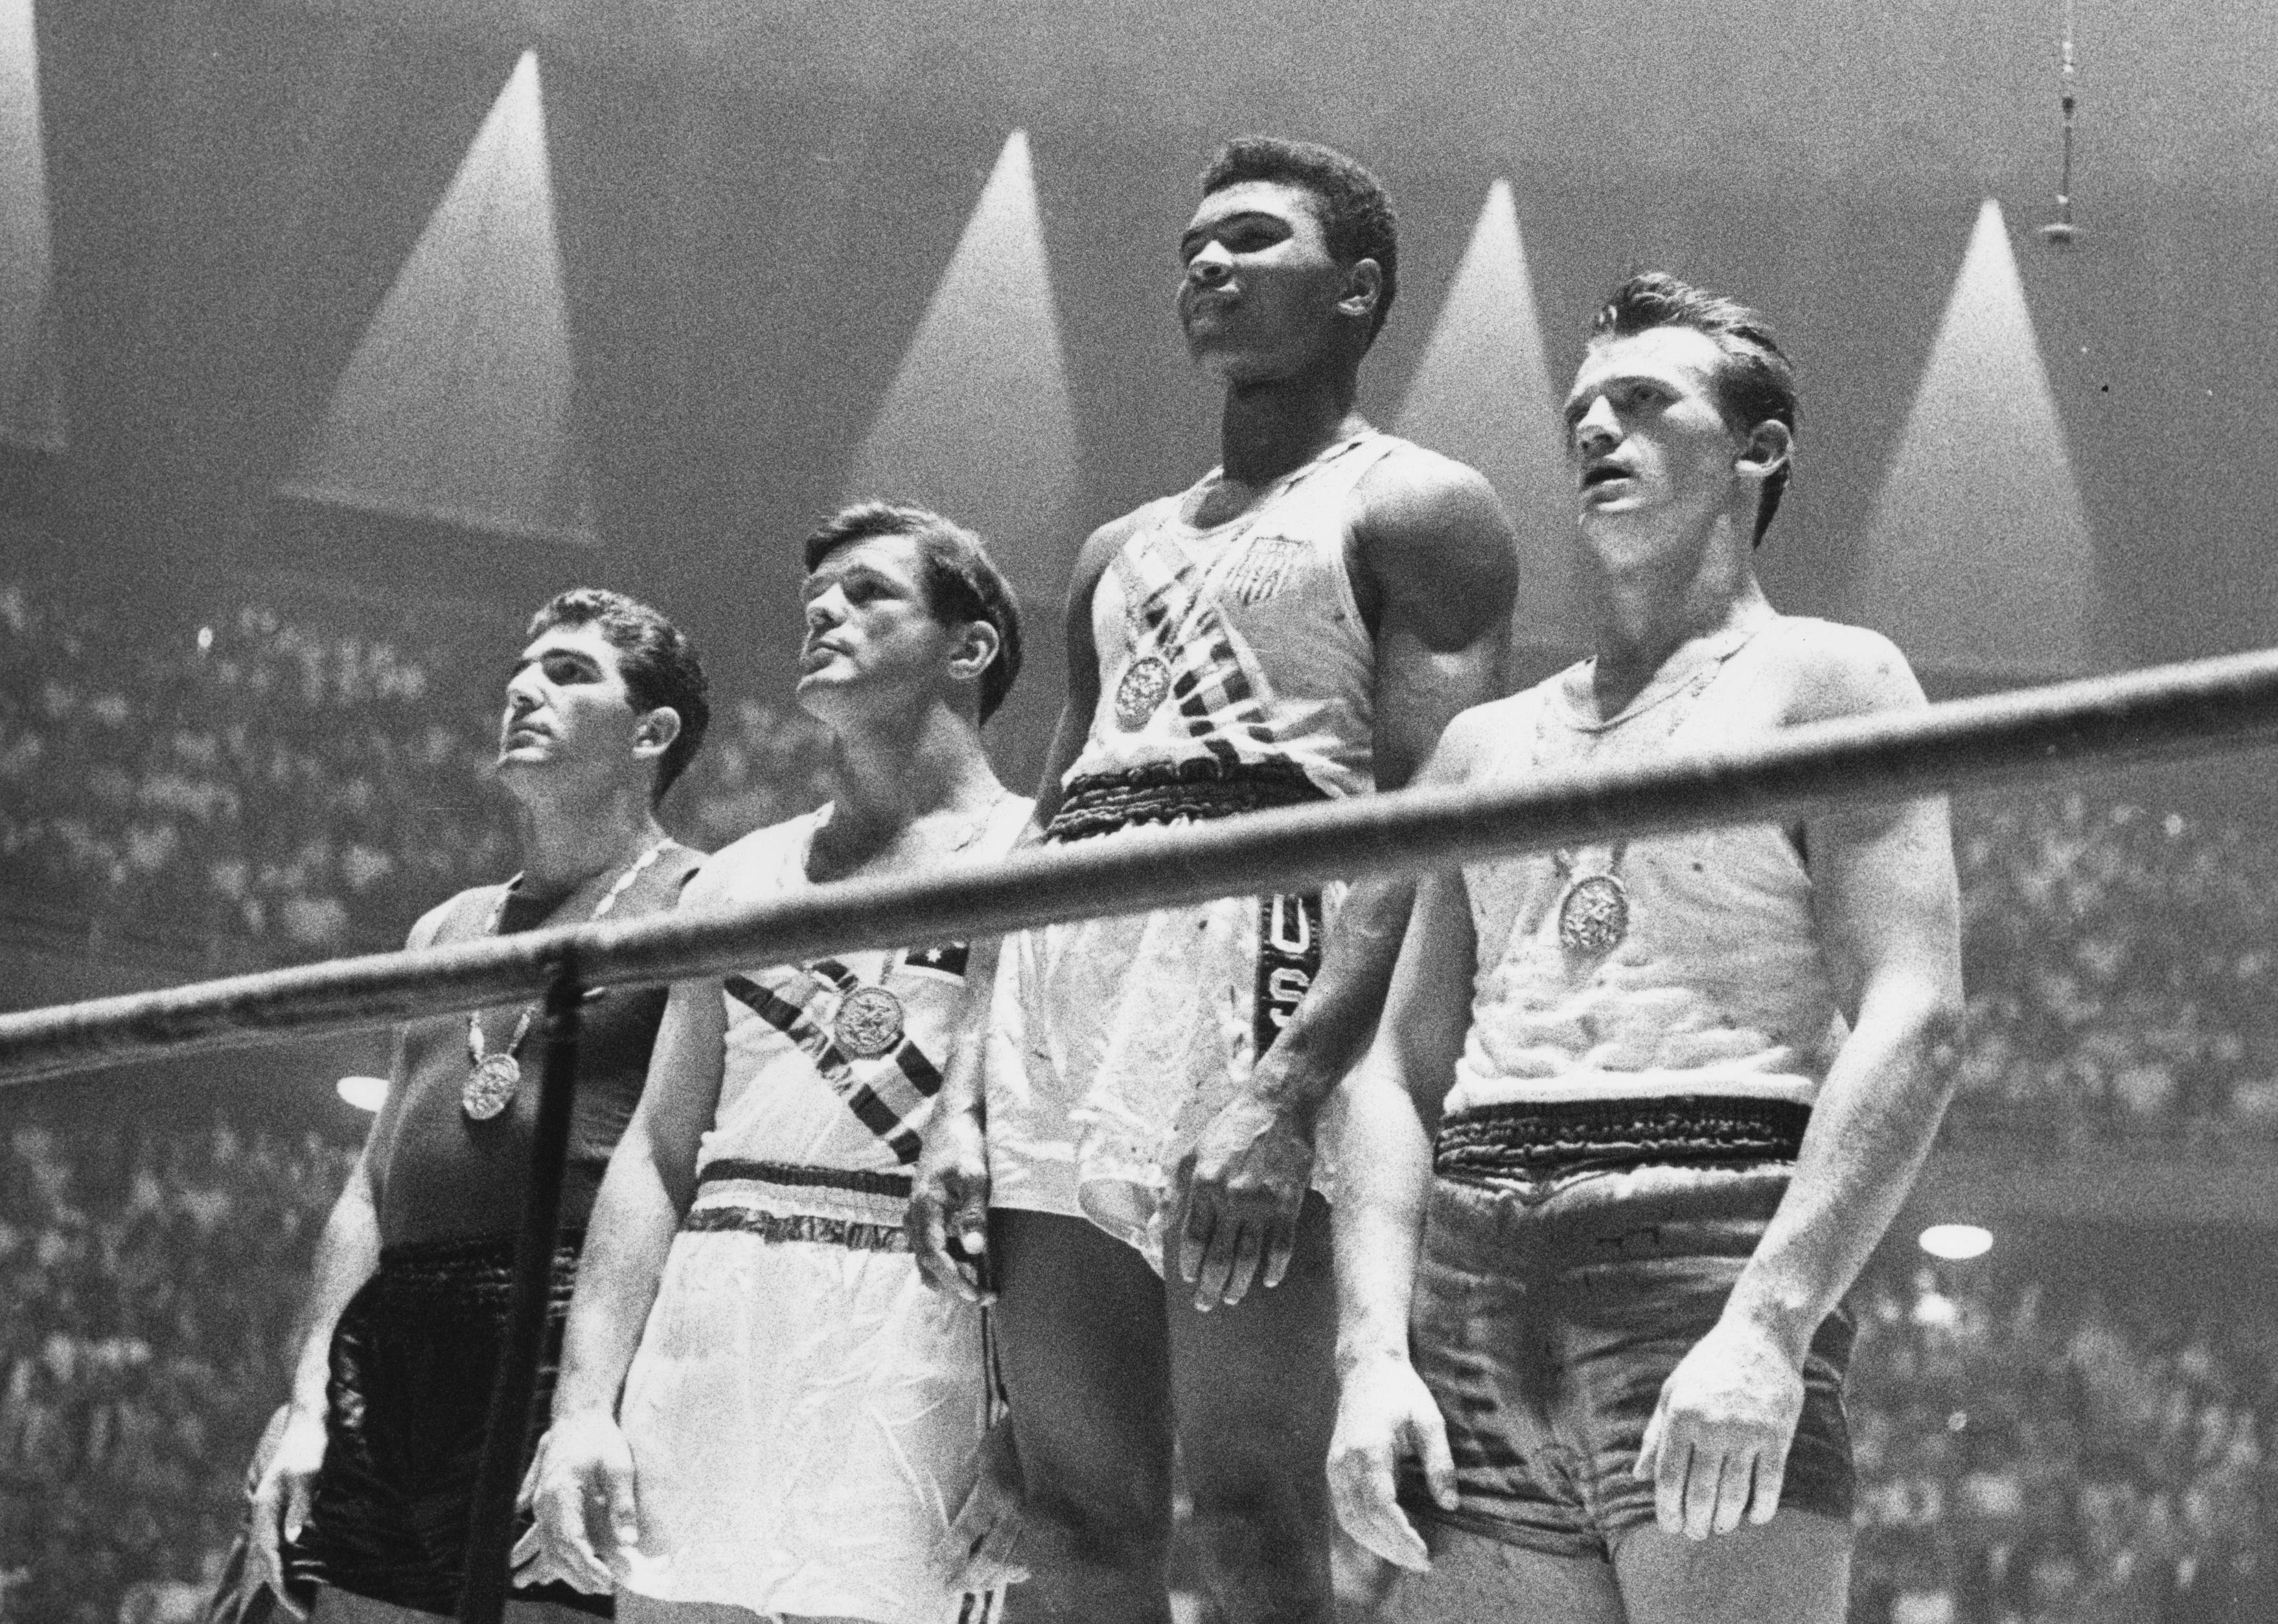 The winners of the 1960 Olympic medals for light heavyweight boxing on the winners